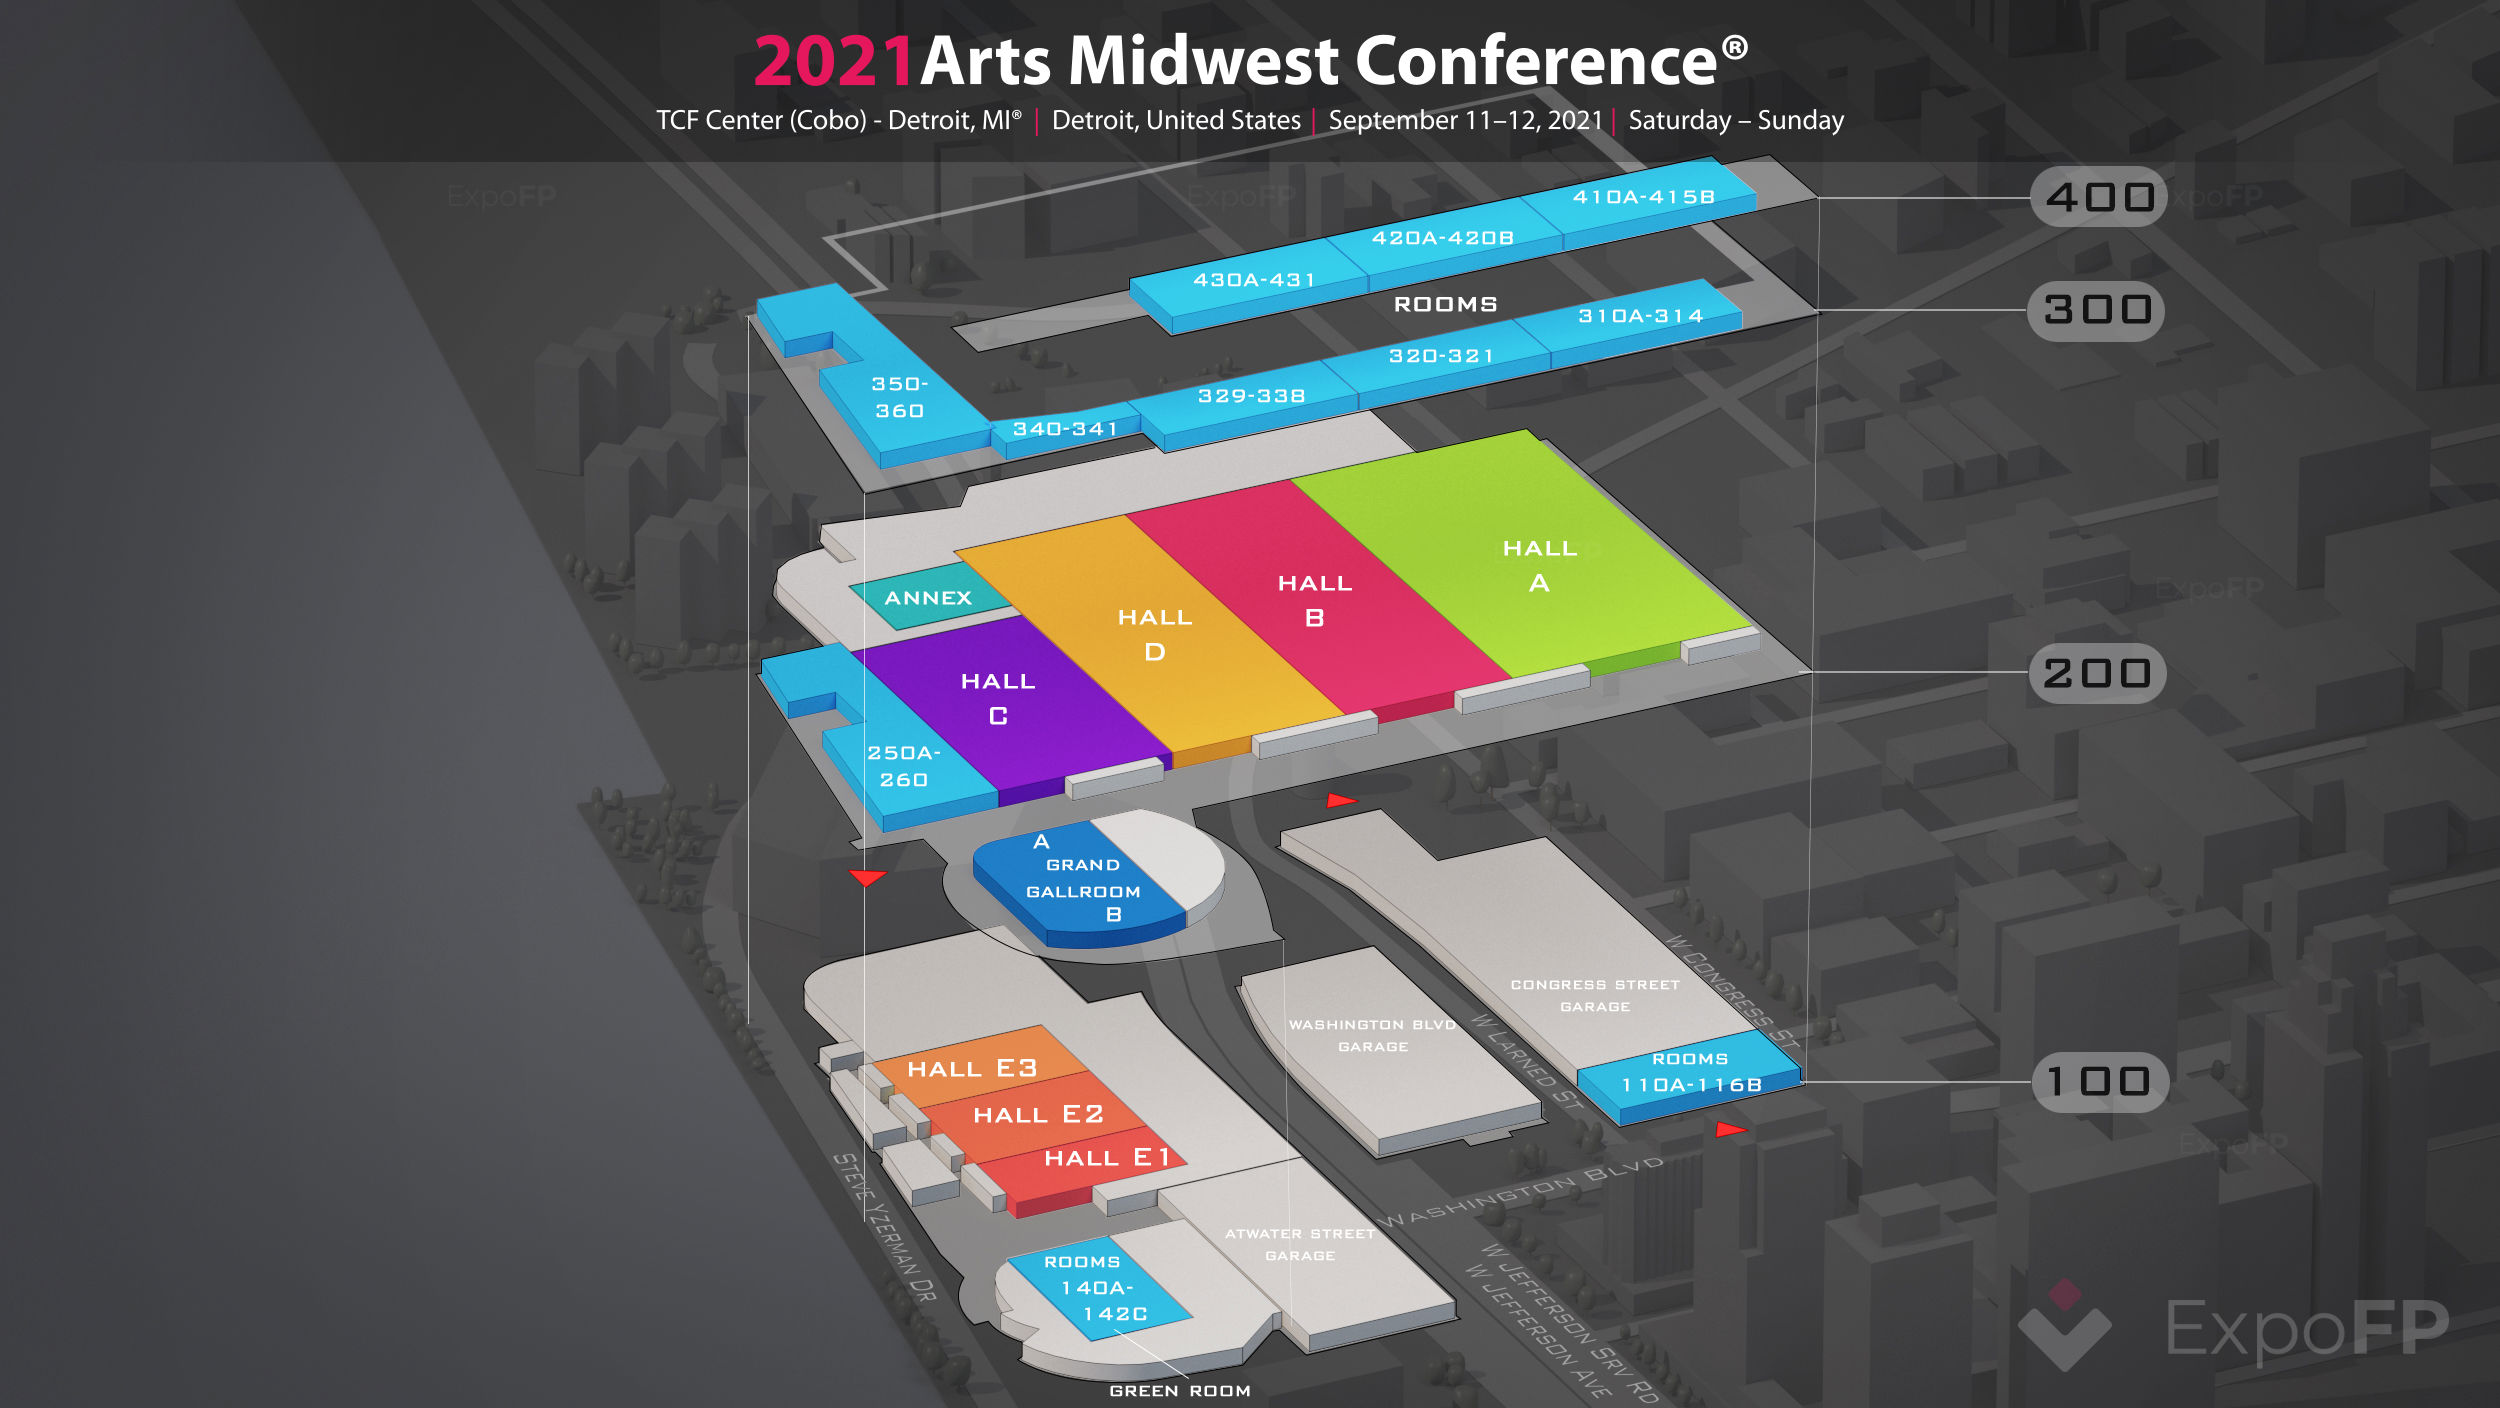 Arts Midwest Conference 2021 In Tcf Center Cobo Detroit Mi